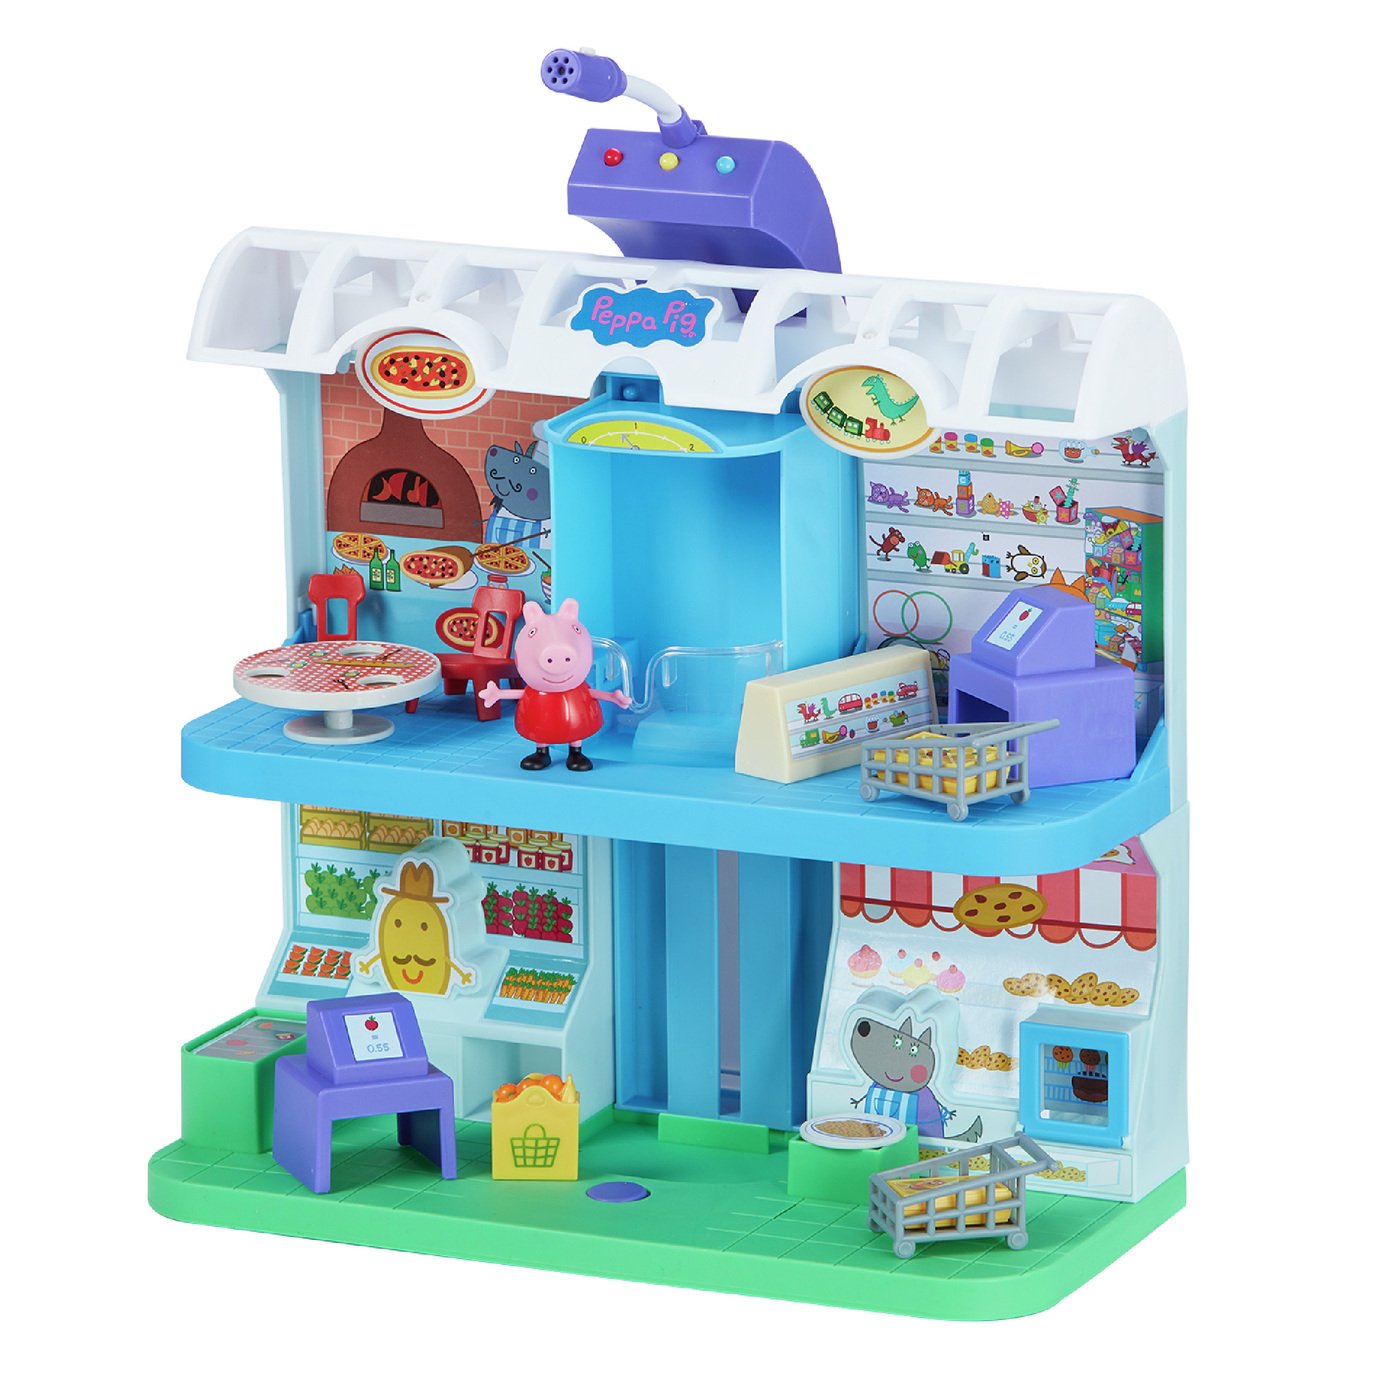 Peppa Pig Shopping Centre Playset review